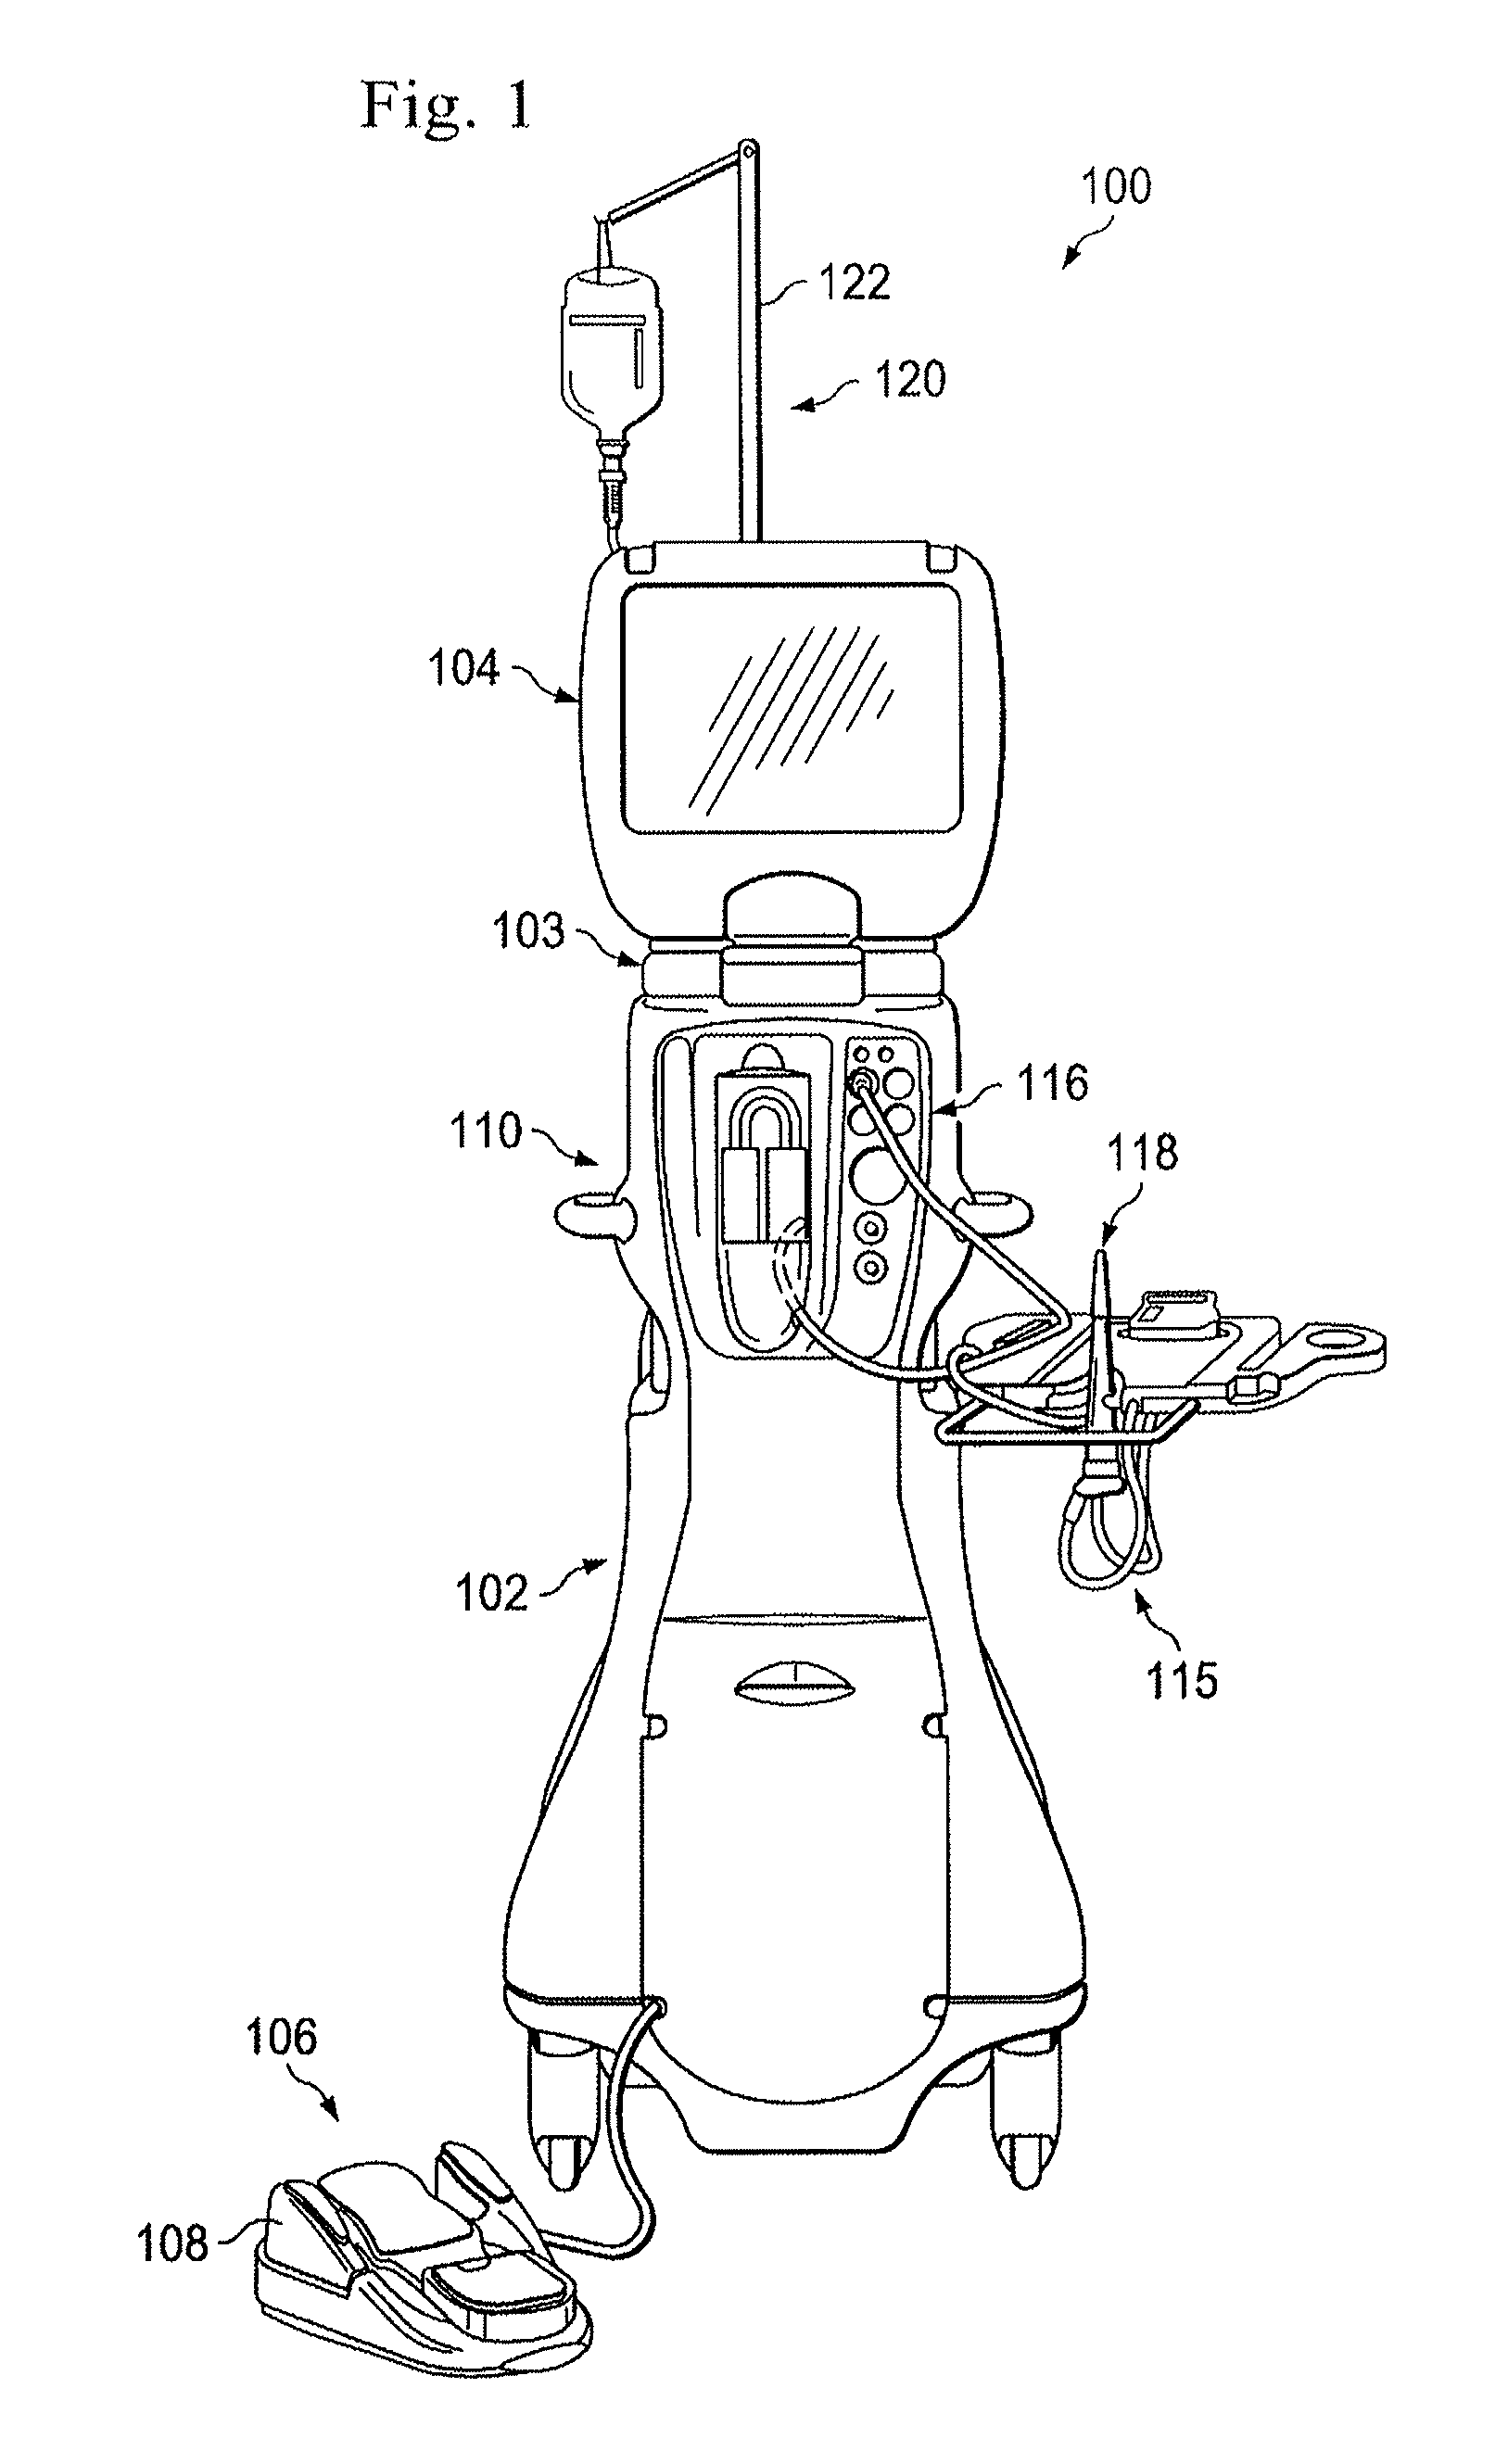 Infusion pressure monitoring system